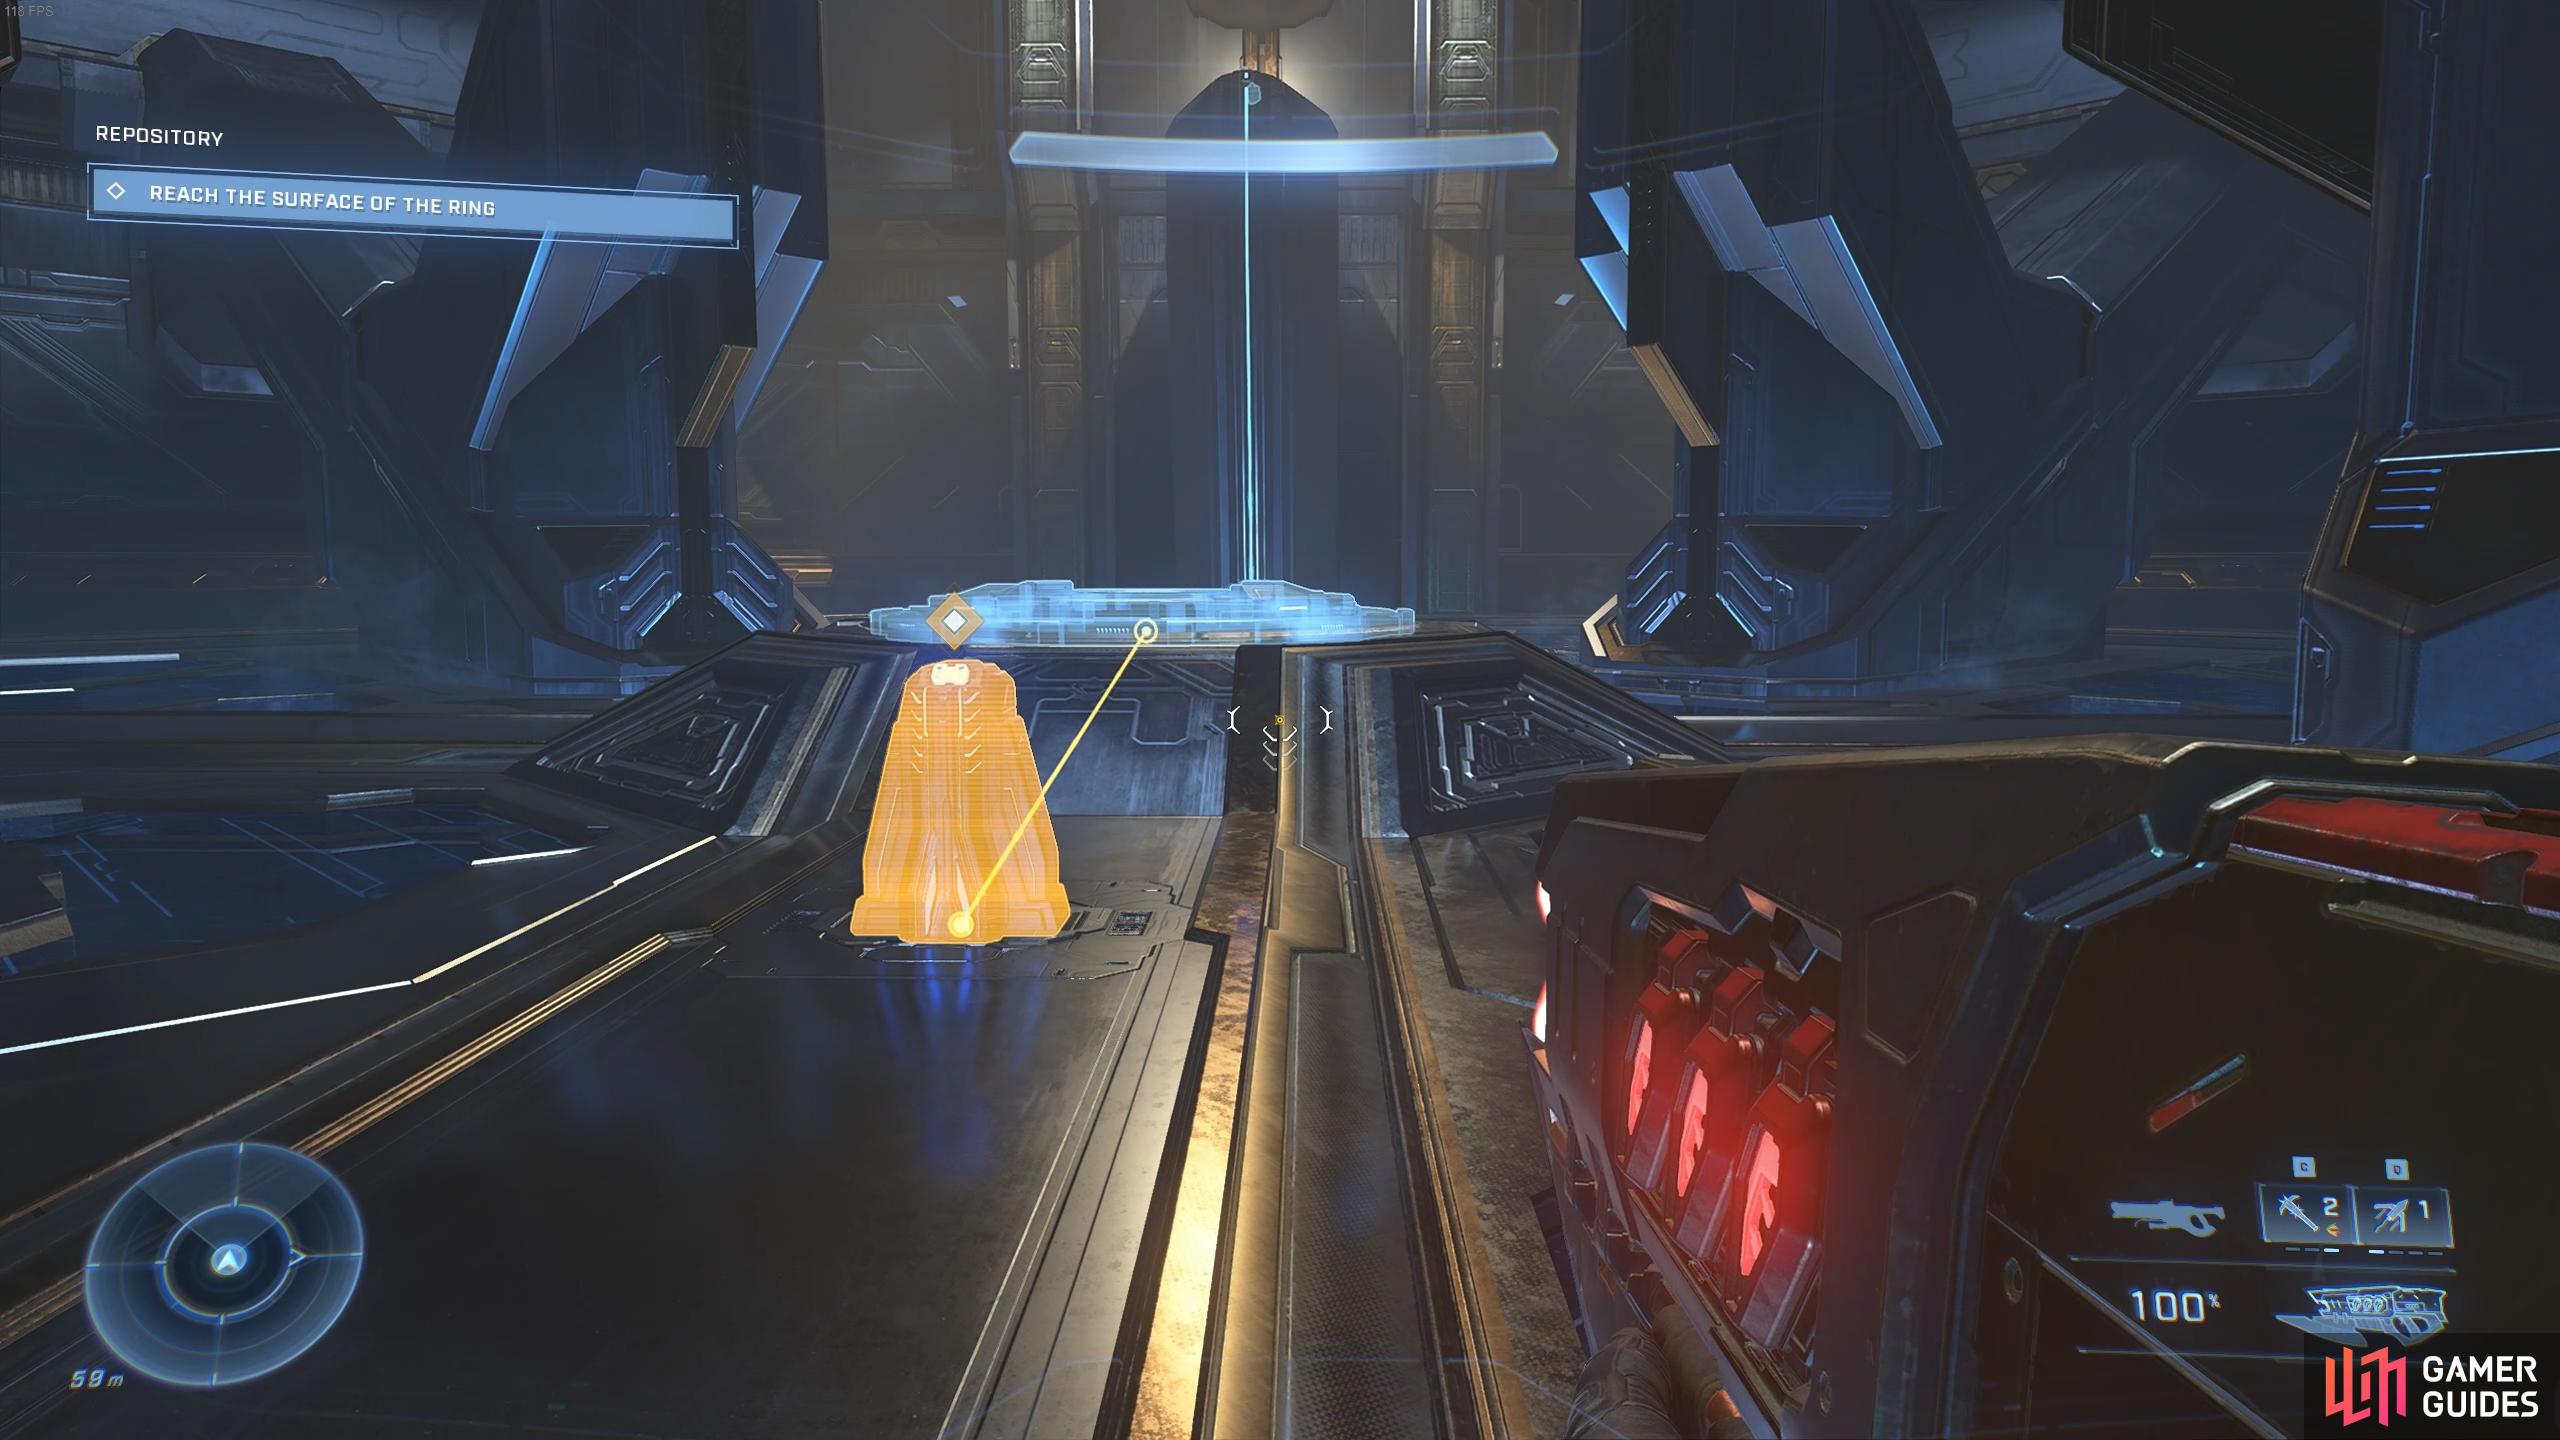 Interact with the terminal near the inactive gravity lift to trigger a cutscene.